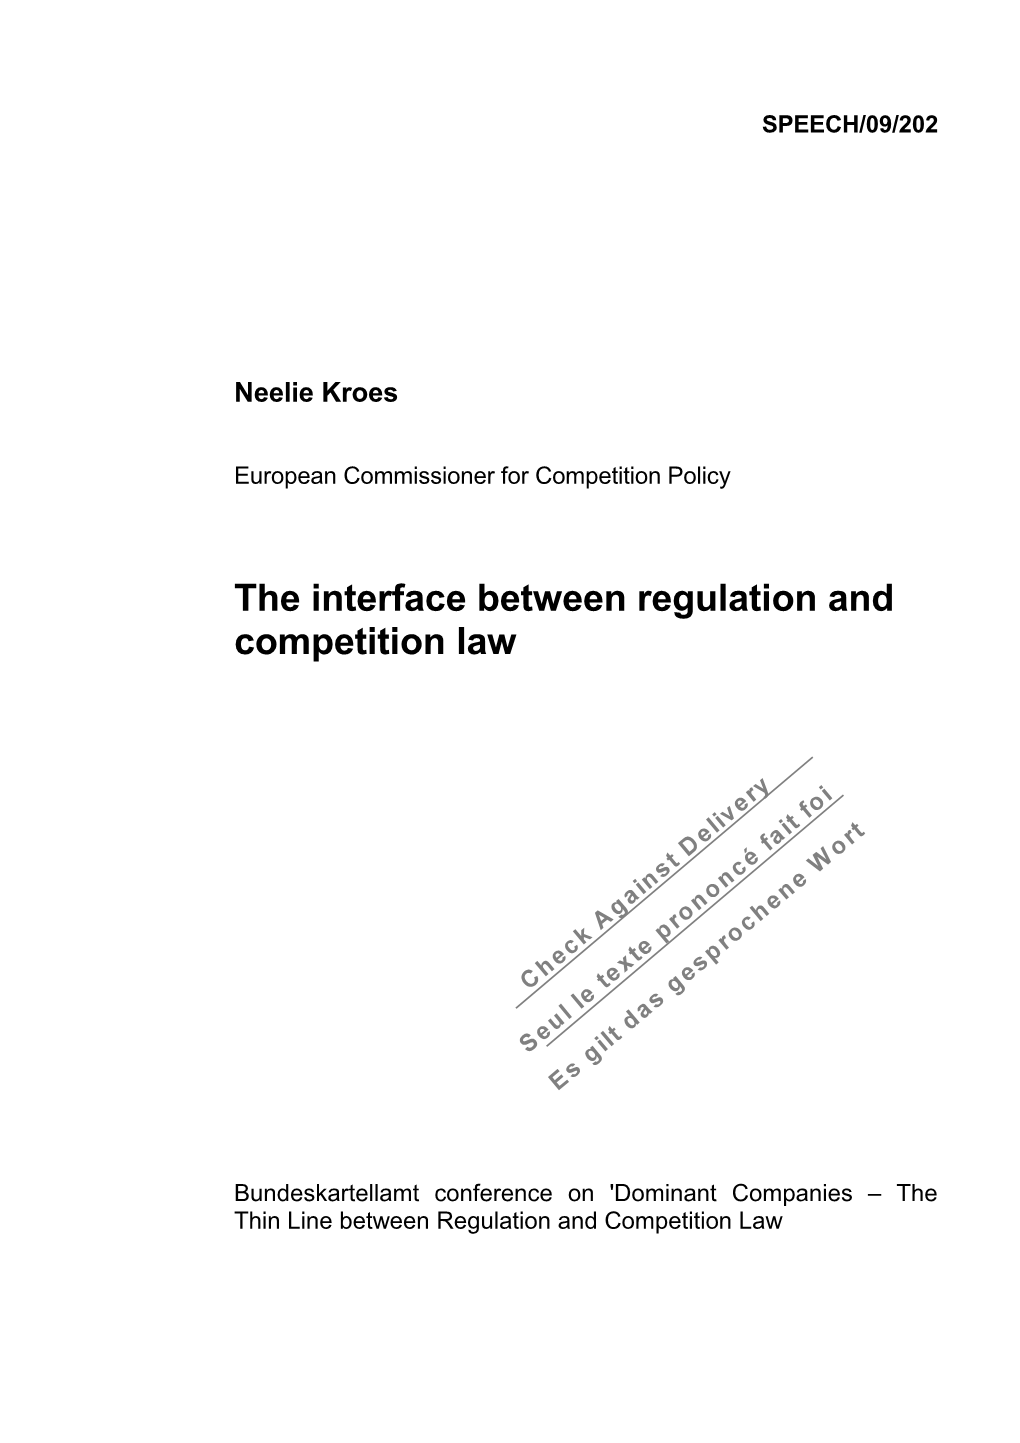 The Interface Between Regulation and Competition Law